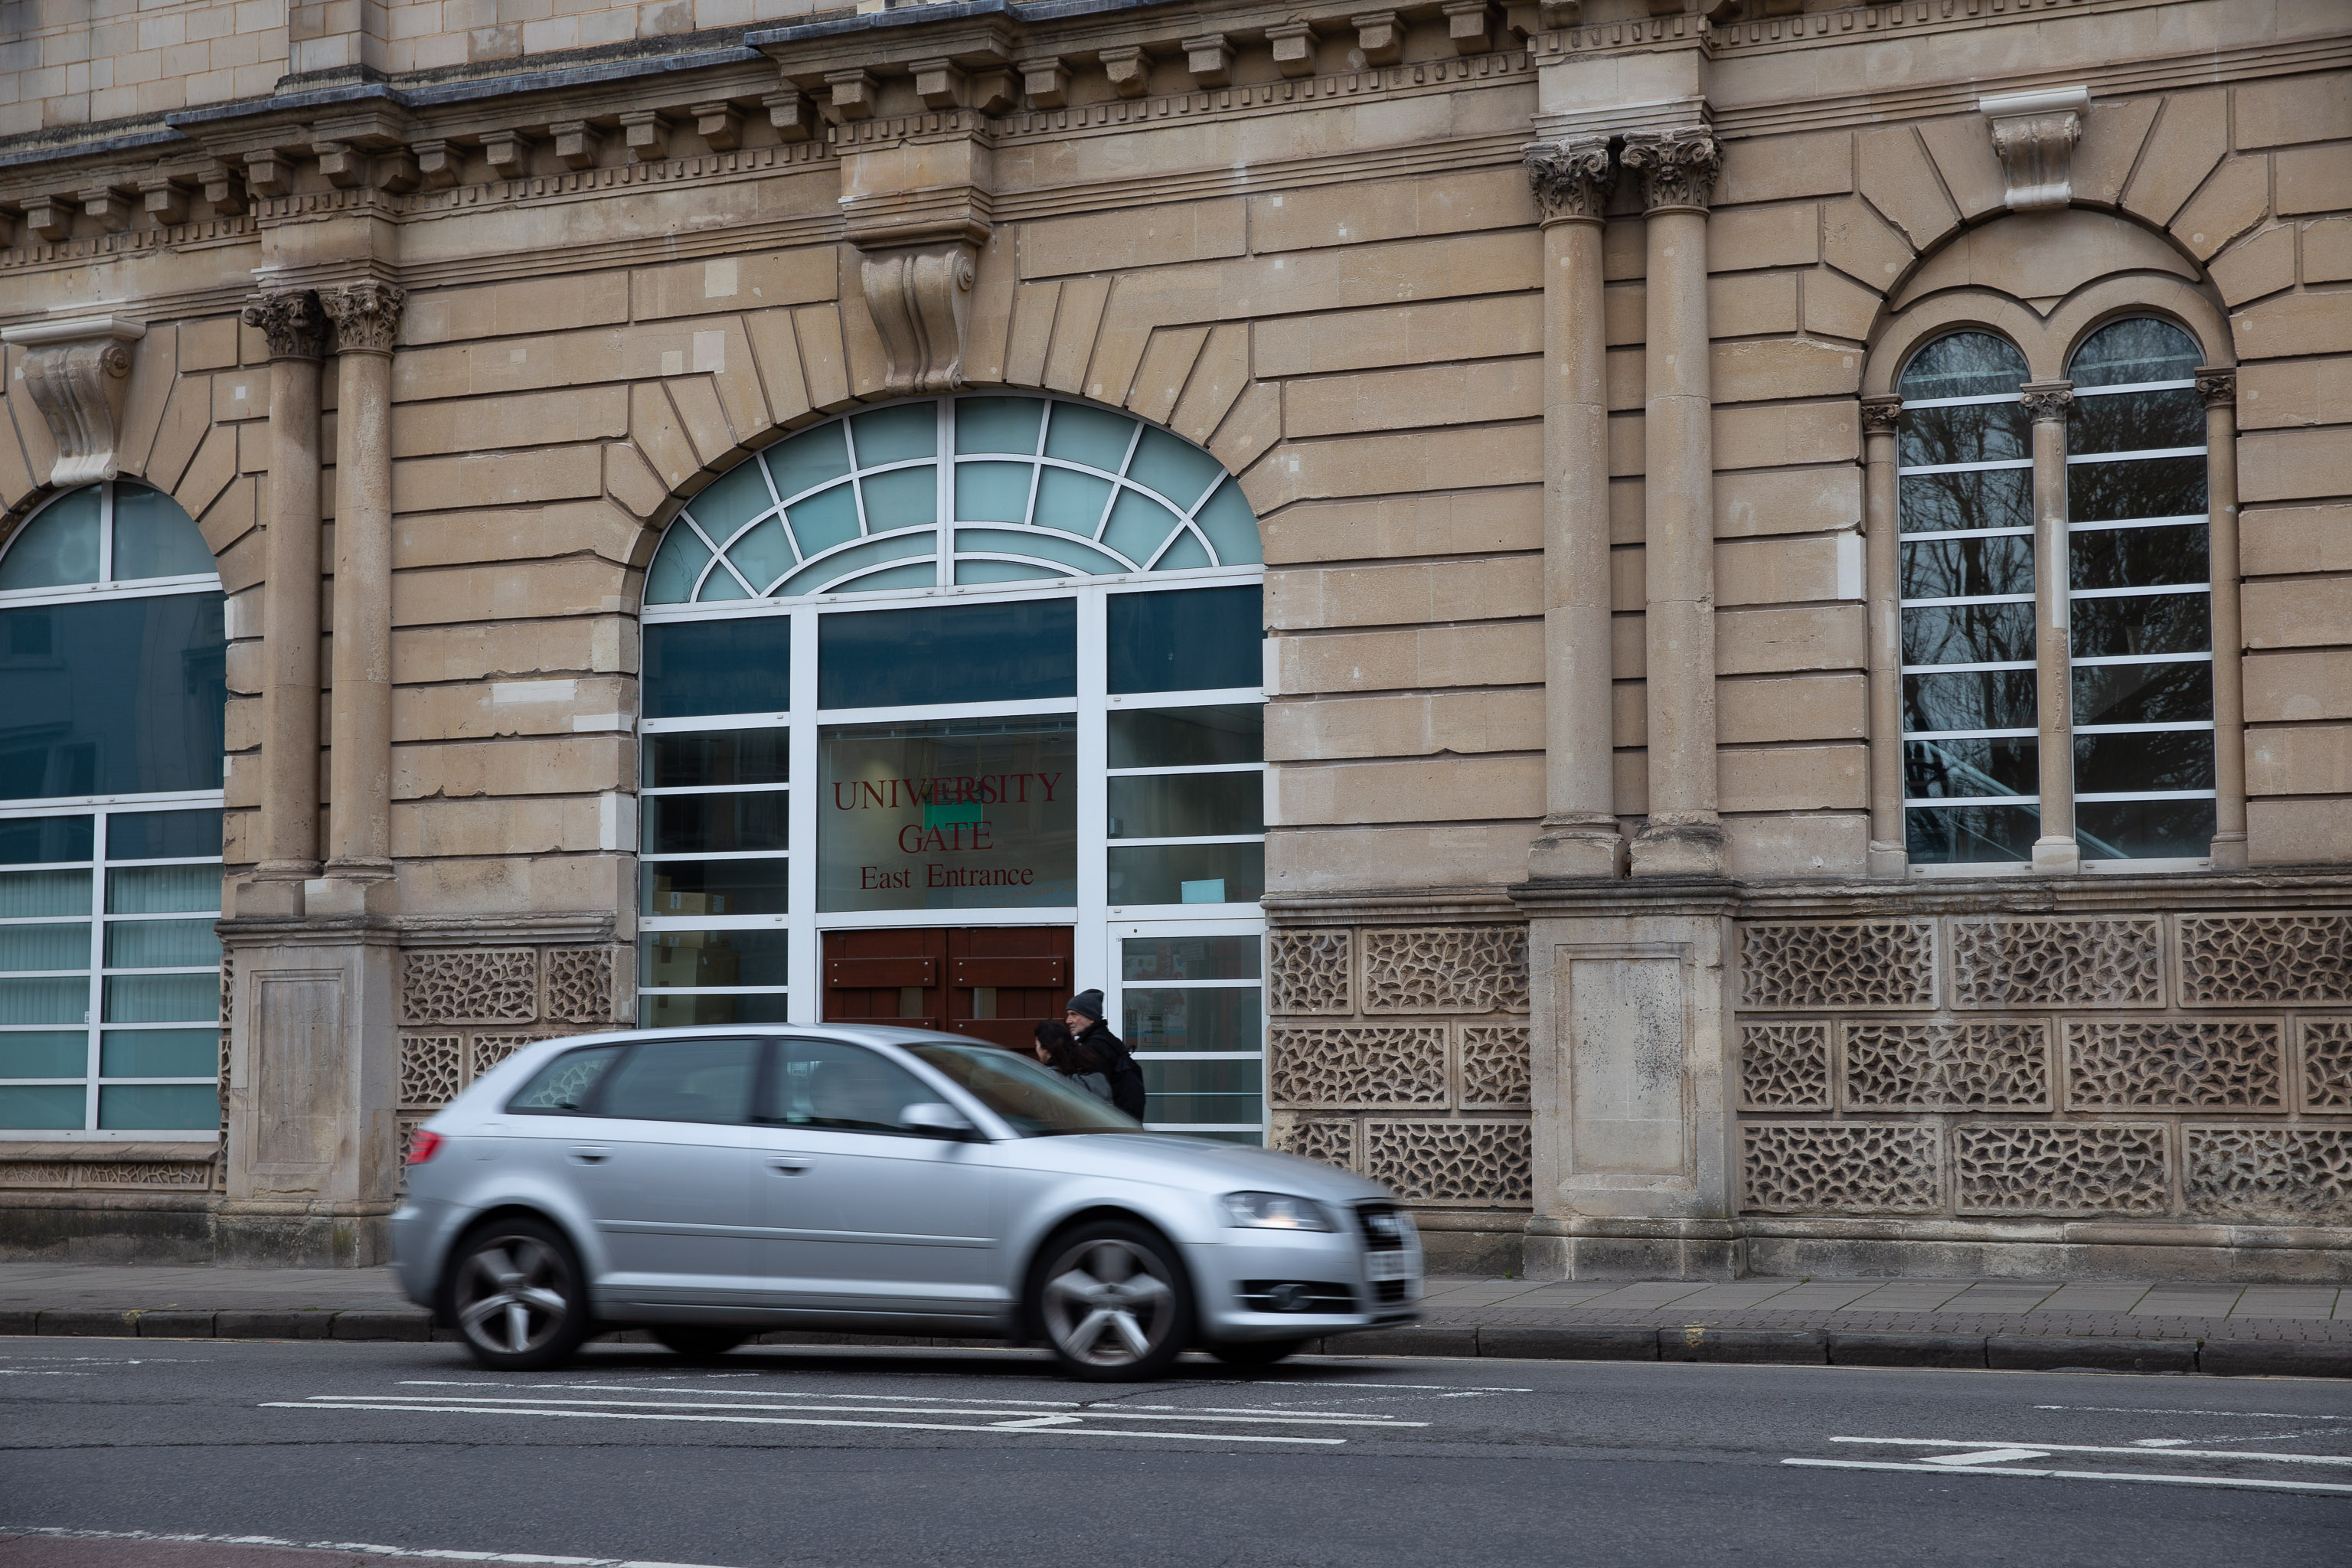 University Gate
"A major new street frontage to the former Veterinary School on Park Row
has created University Gate", according to the University of Bristol
Strat...